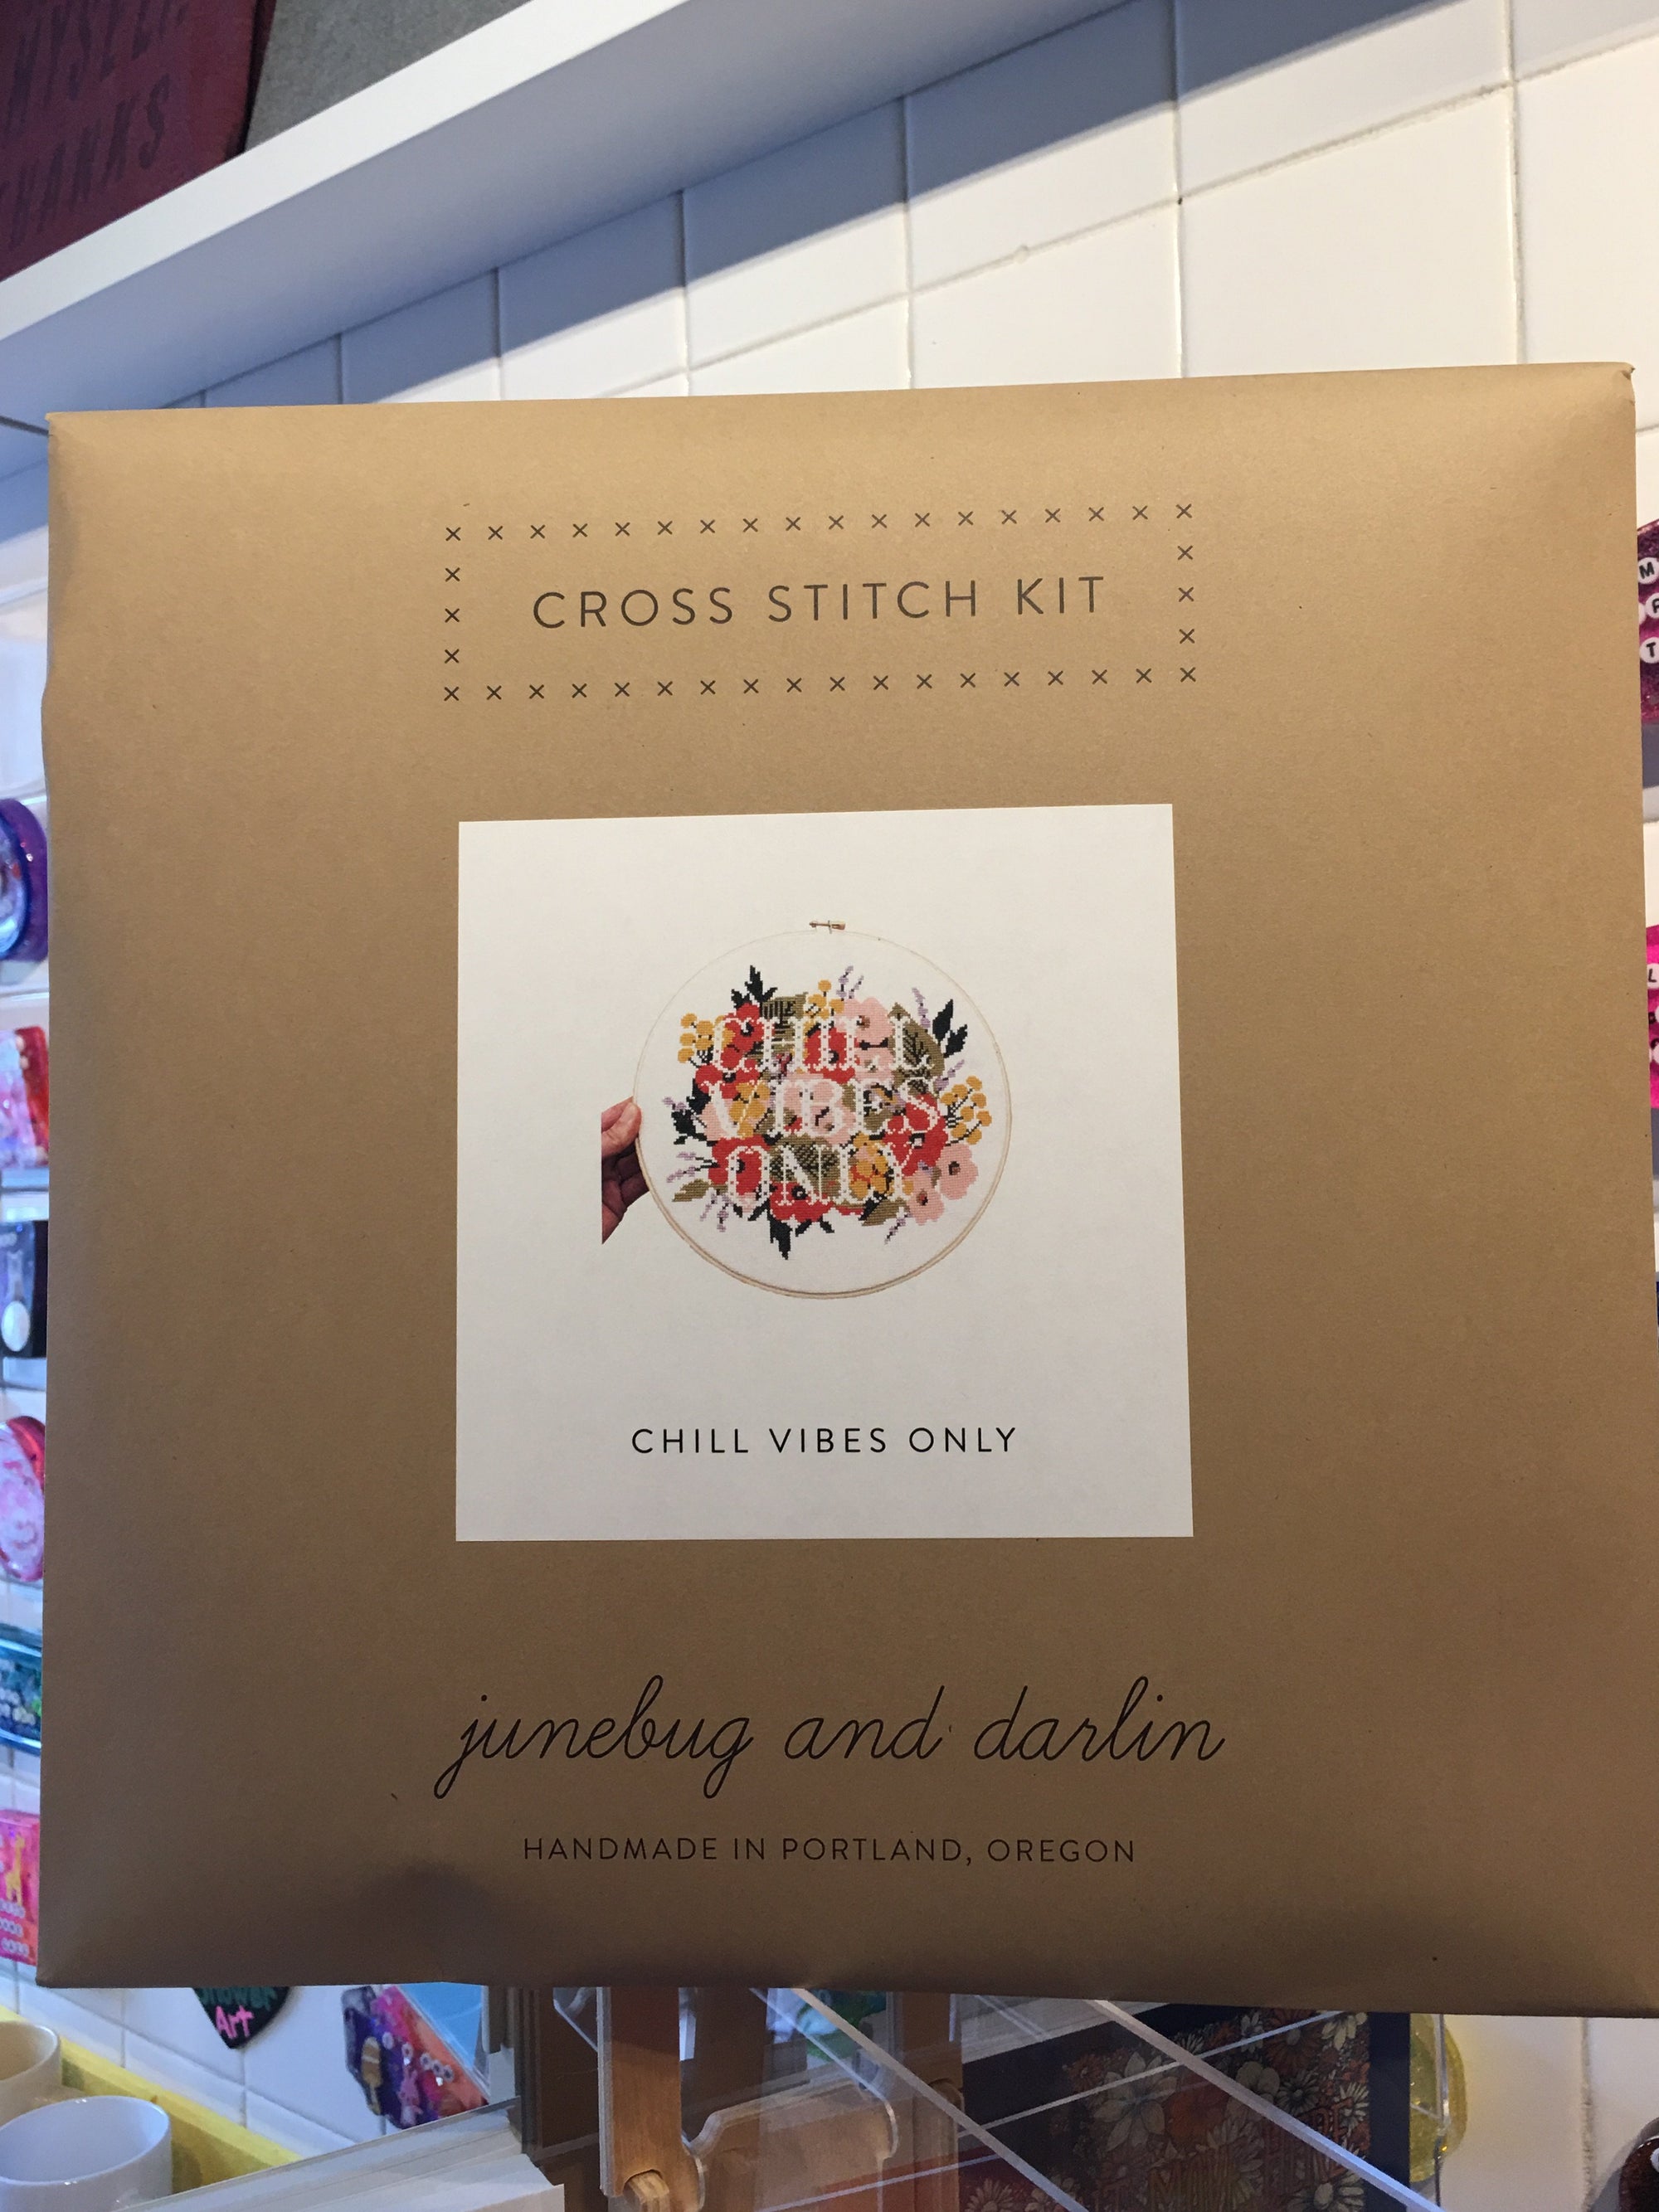 Cross Stitch Kit: Chill Vibes Only